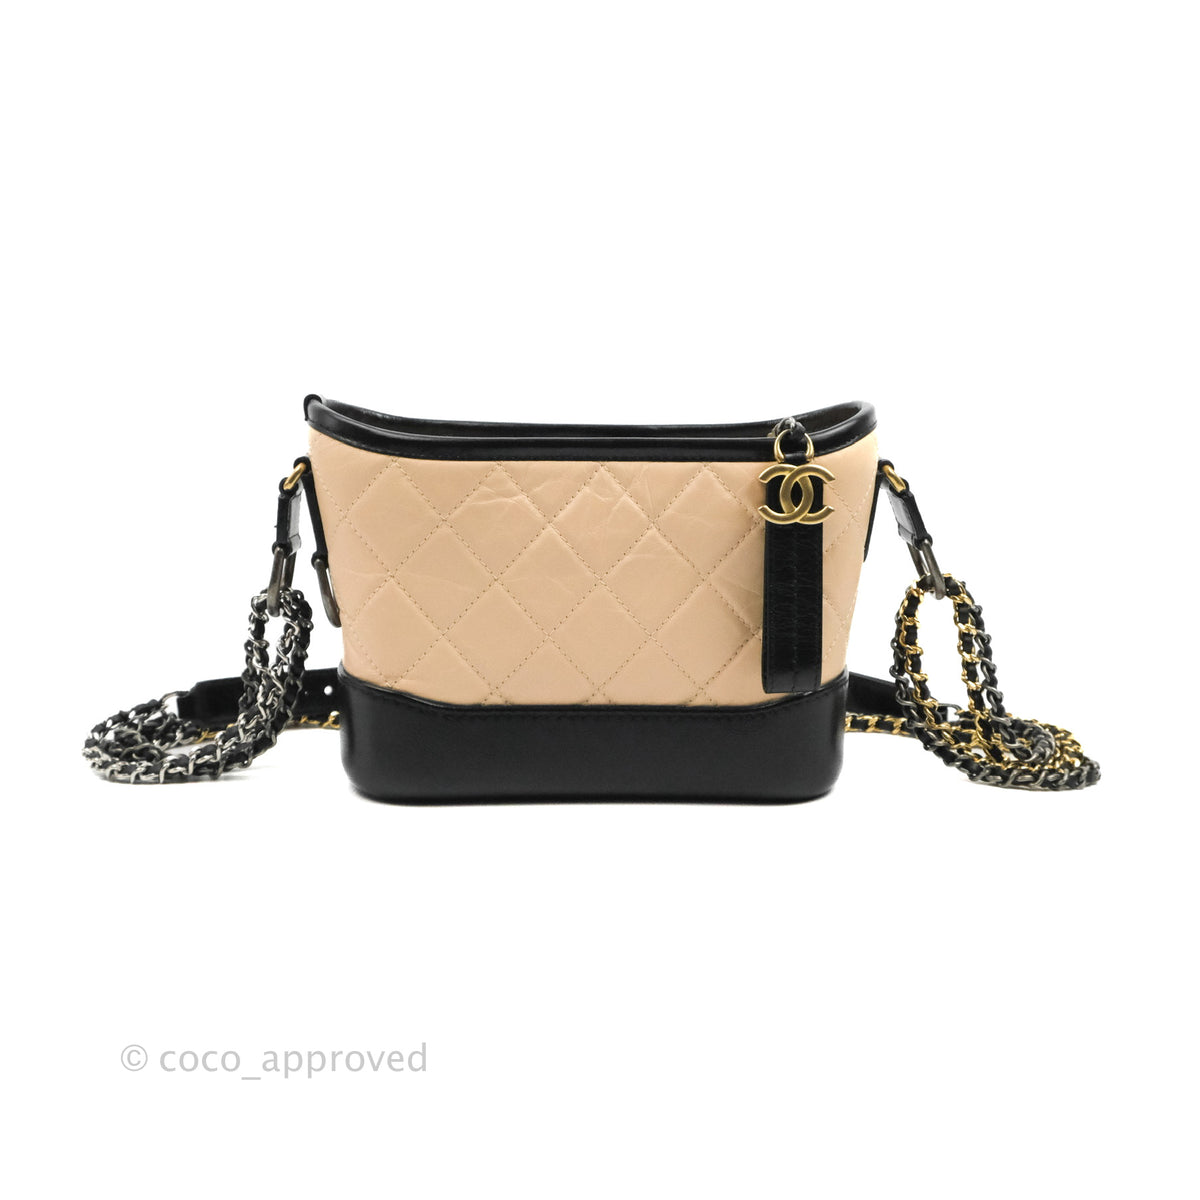 Chanel White Quilted Calfskin Small Gabrielle Hobo Bag Gold And